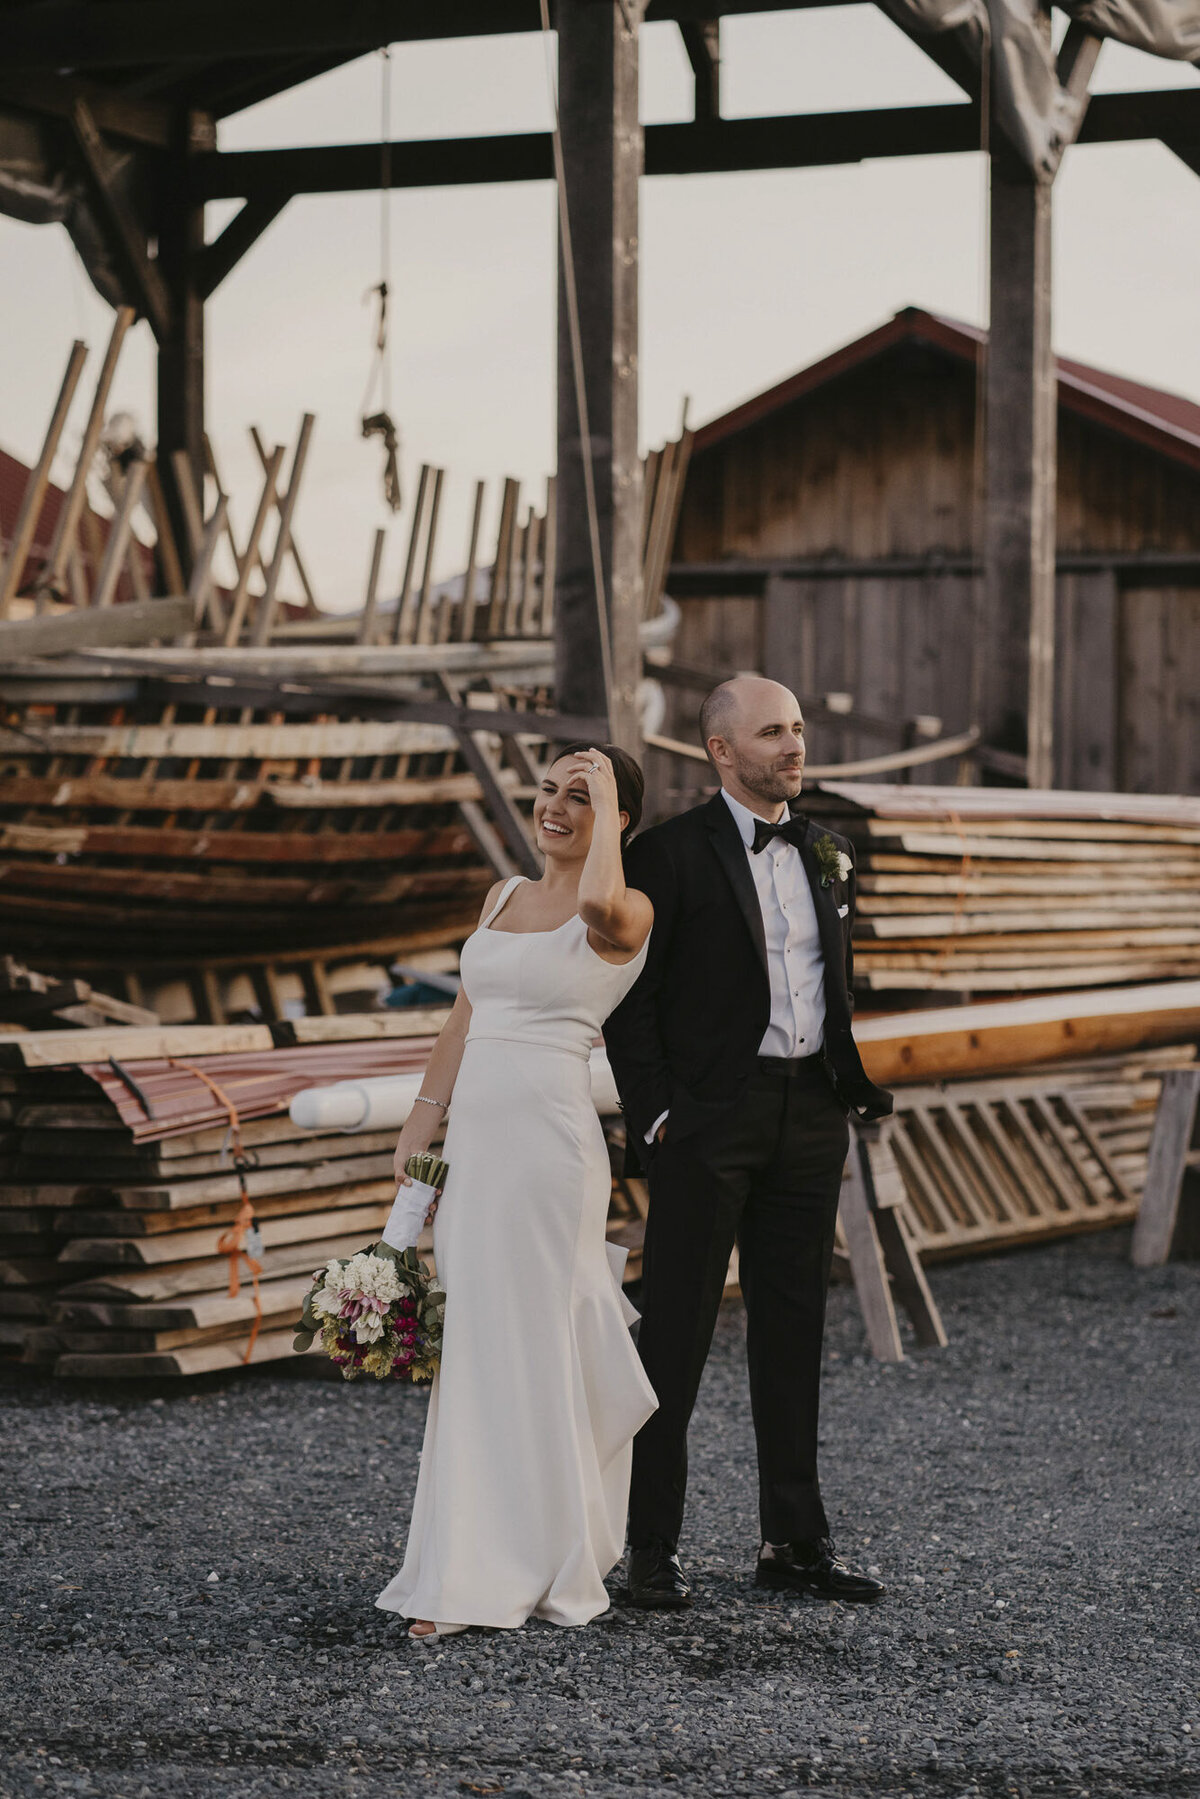 Bride and groom standing near piles of wood